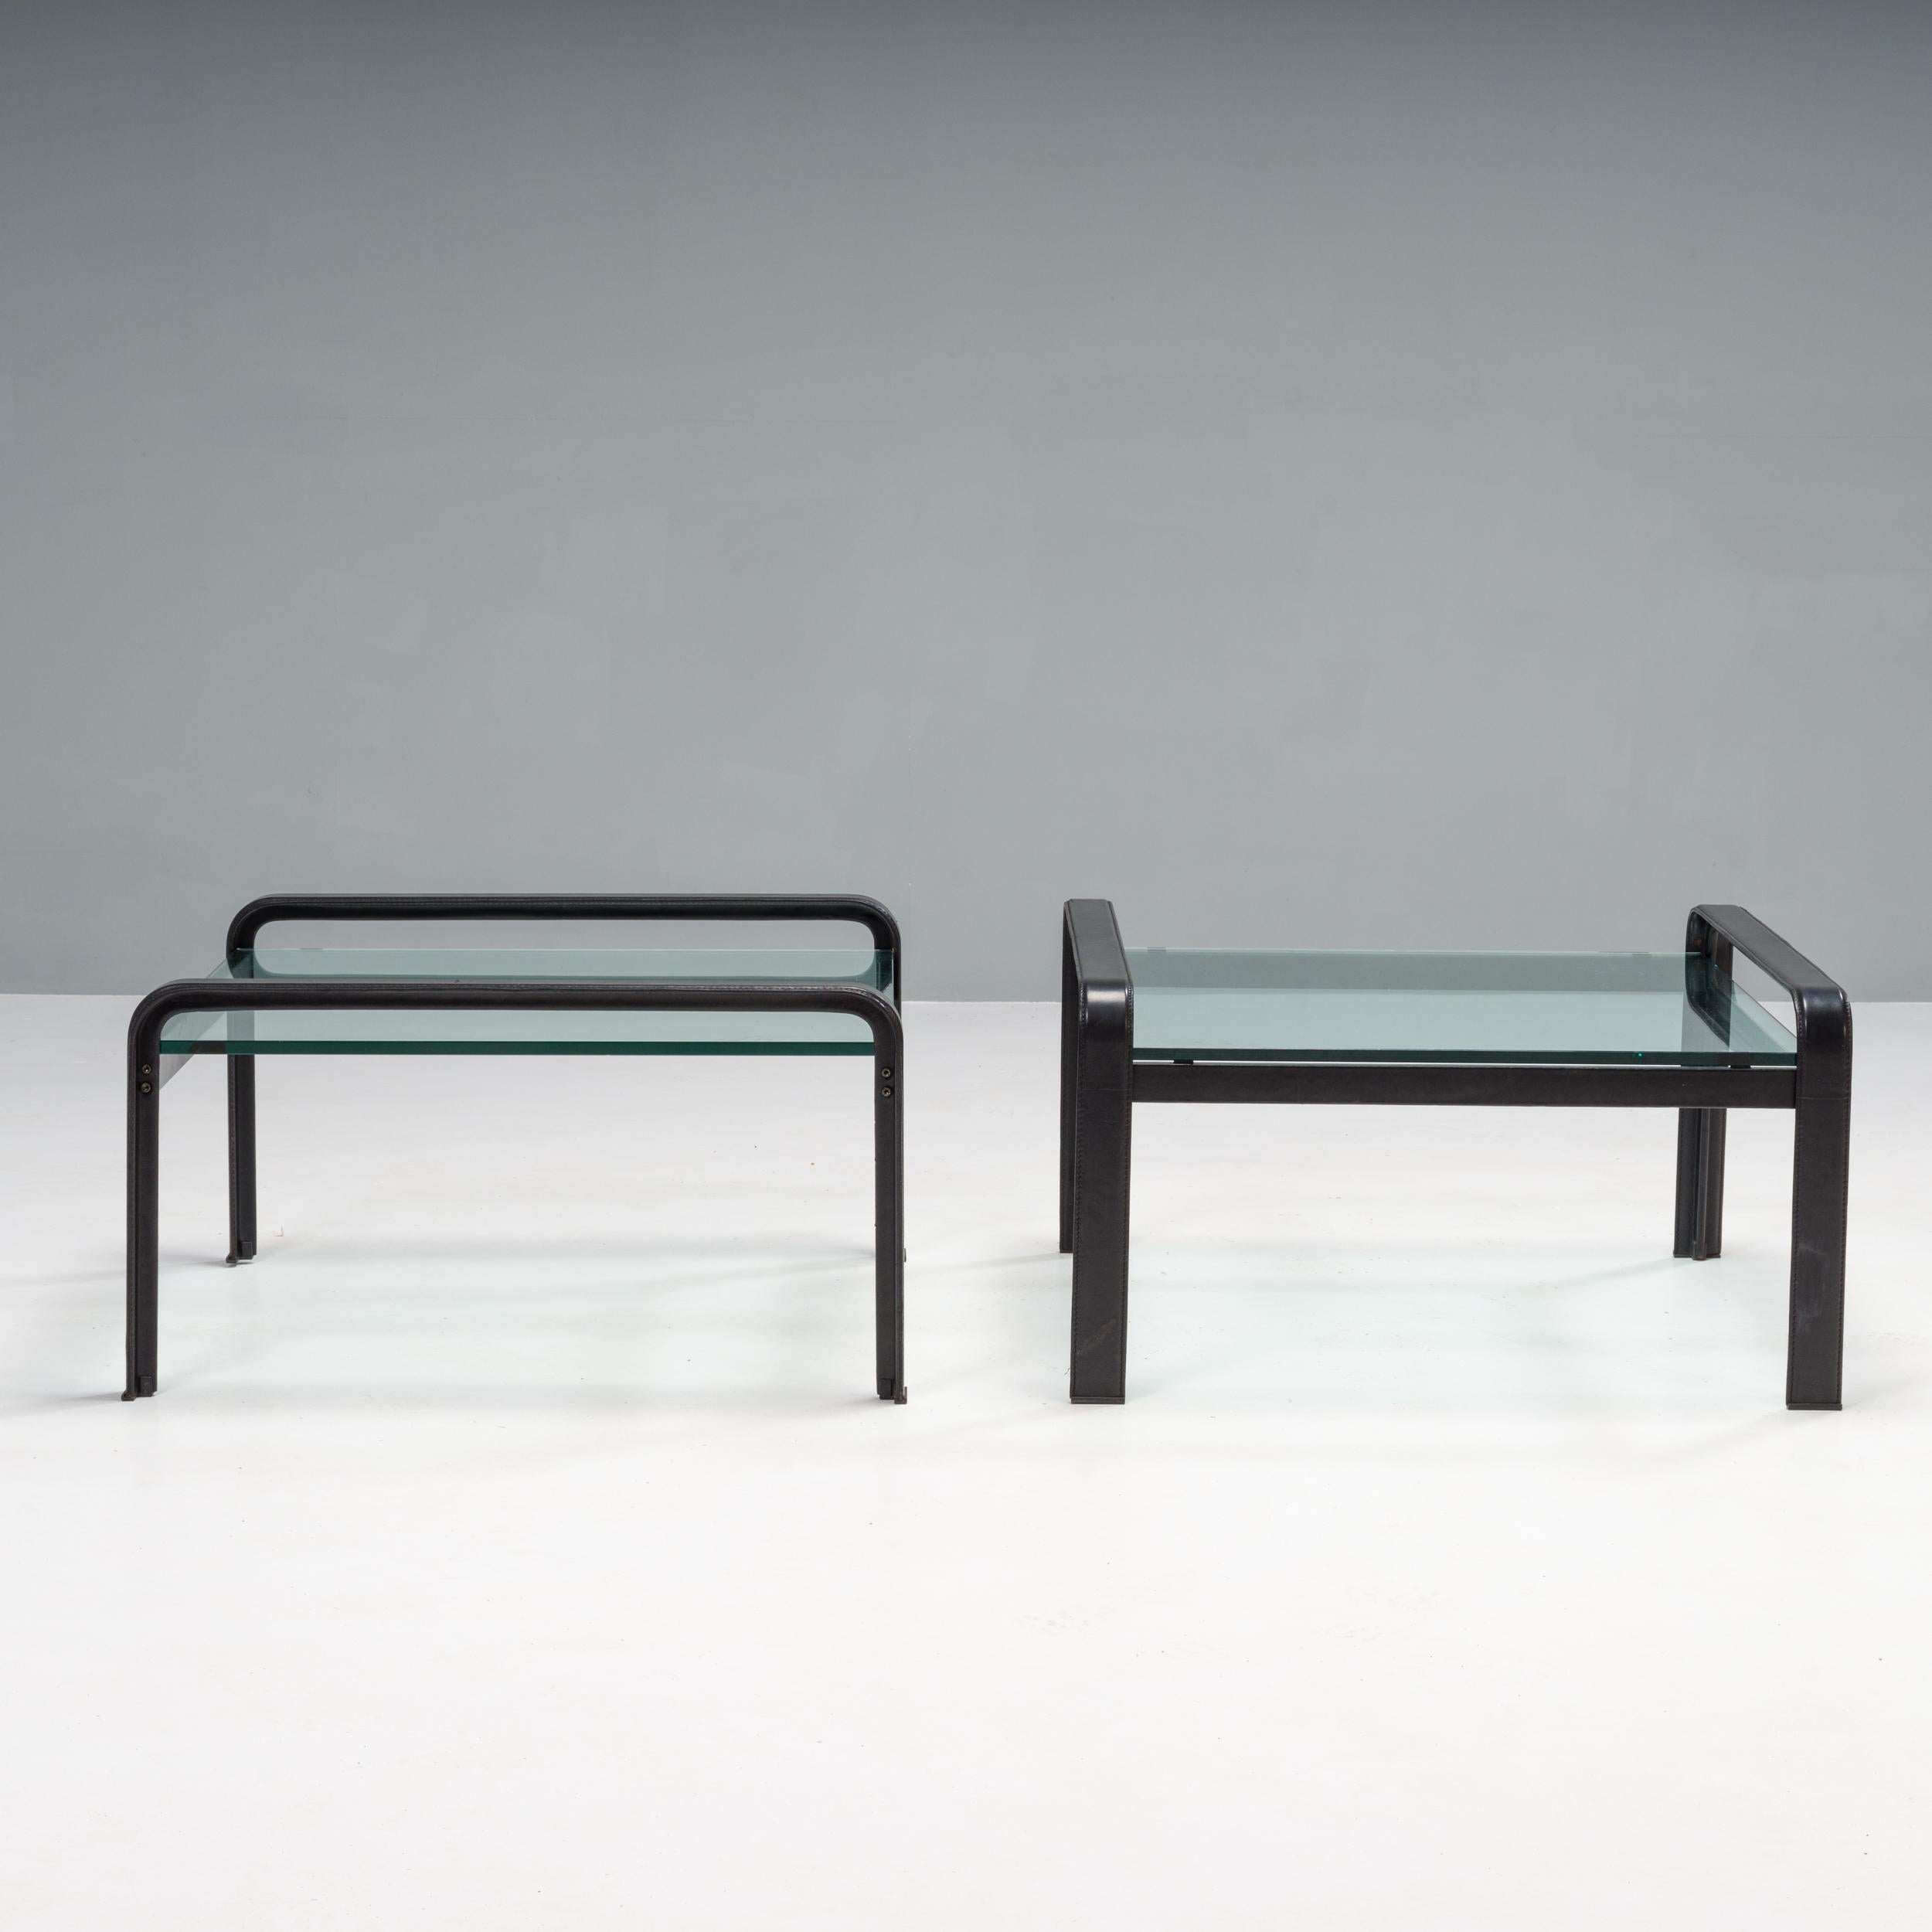 Designed by Tito Agnoli for Matteo Grassi in the 1970s, this set of side tables is a fantastic example of mid-century Italian design.

Constructed from steel, the frame of the table is covered in black leather, which curves over the corners,